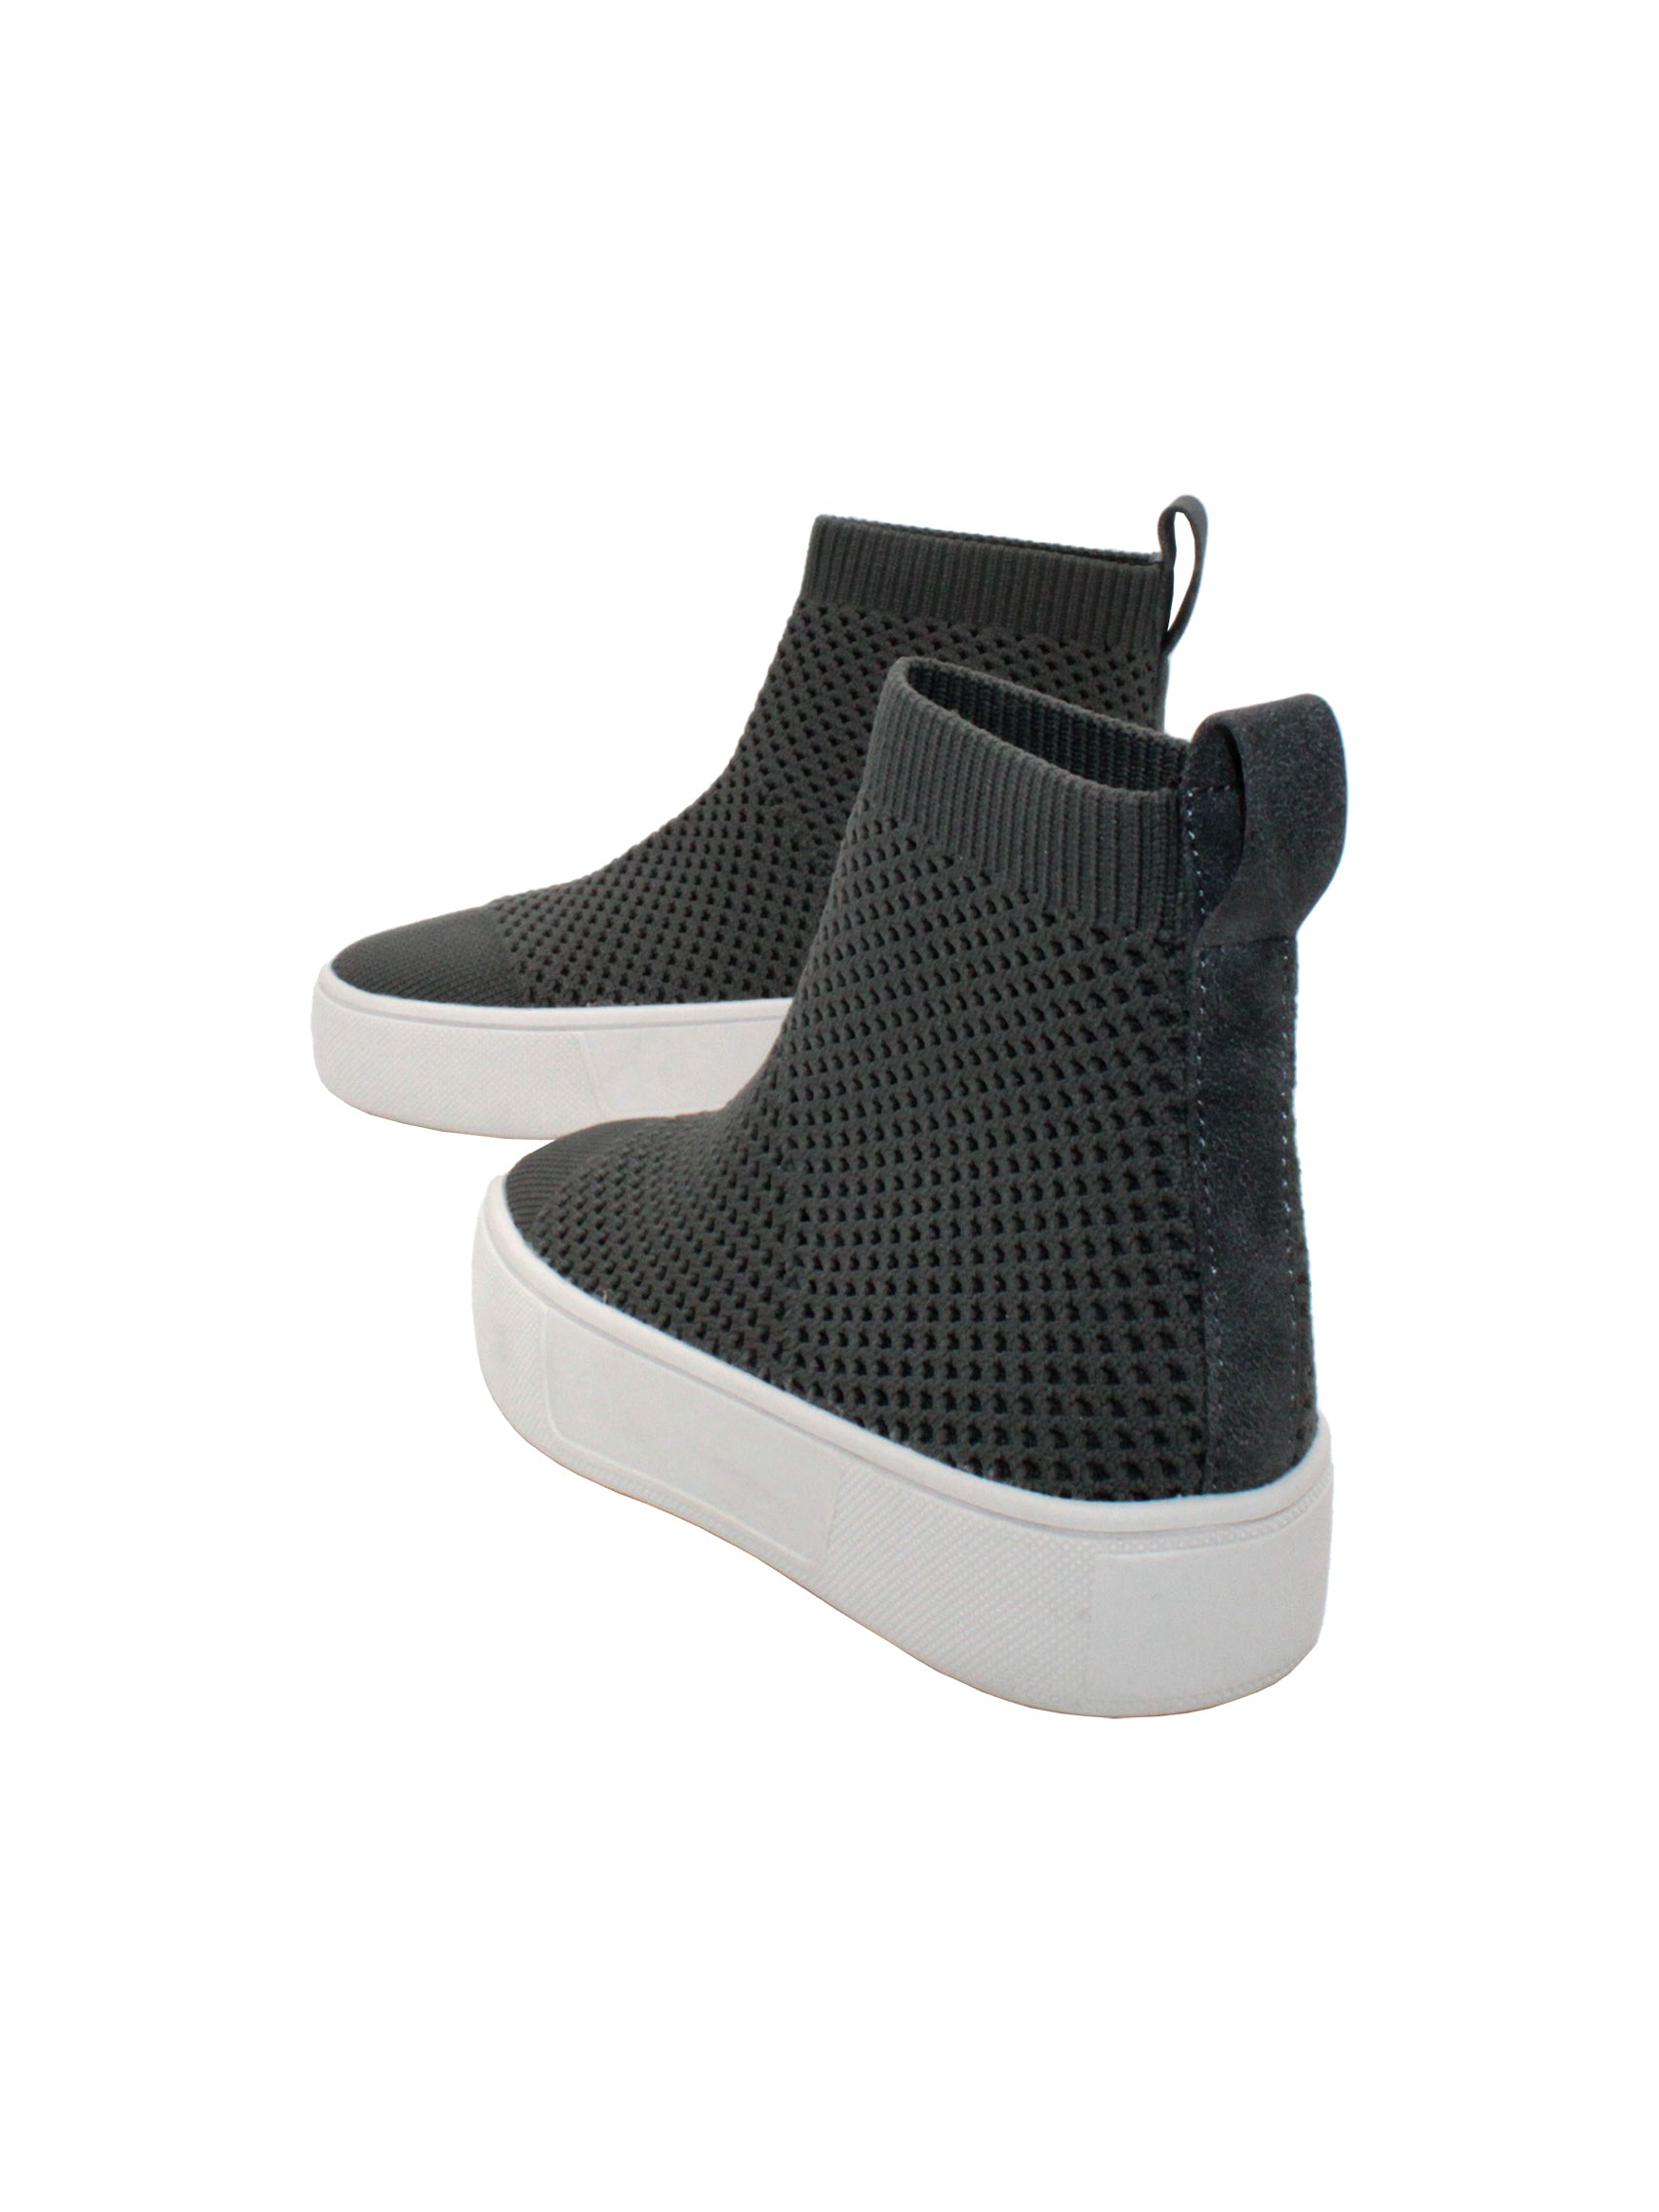 Stretch knit upper with back pull tab Stretch knit lining Internal nylon zipper Slip-on bootie sneaker style Signature ultra comfort EVA insole Approx. 3.5” shaft height Textured rubber sneaker bottom CHARCOAL back